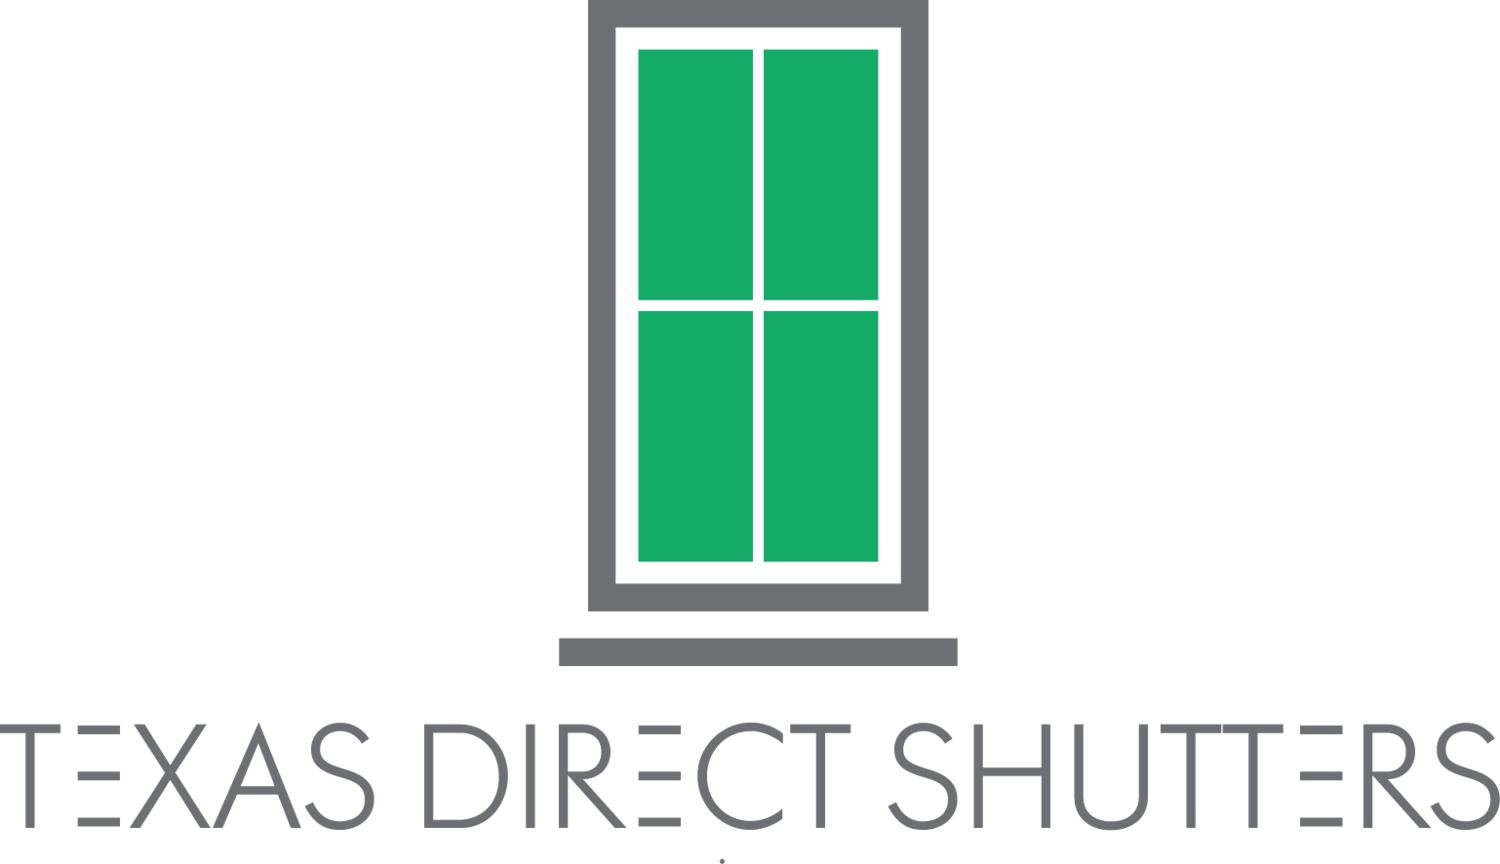 Texas Direct Shutters - Austin's Premier Window Fashions - Shutters, Shades and Blinds - 512-900-7620